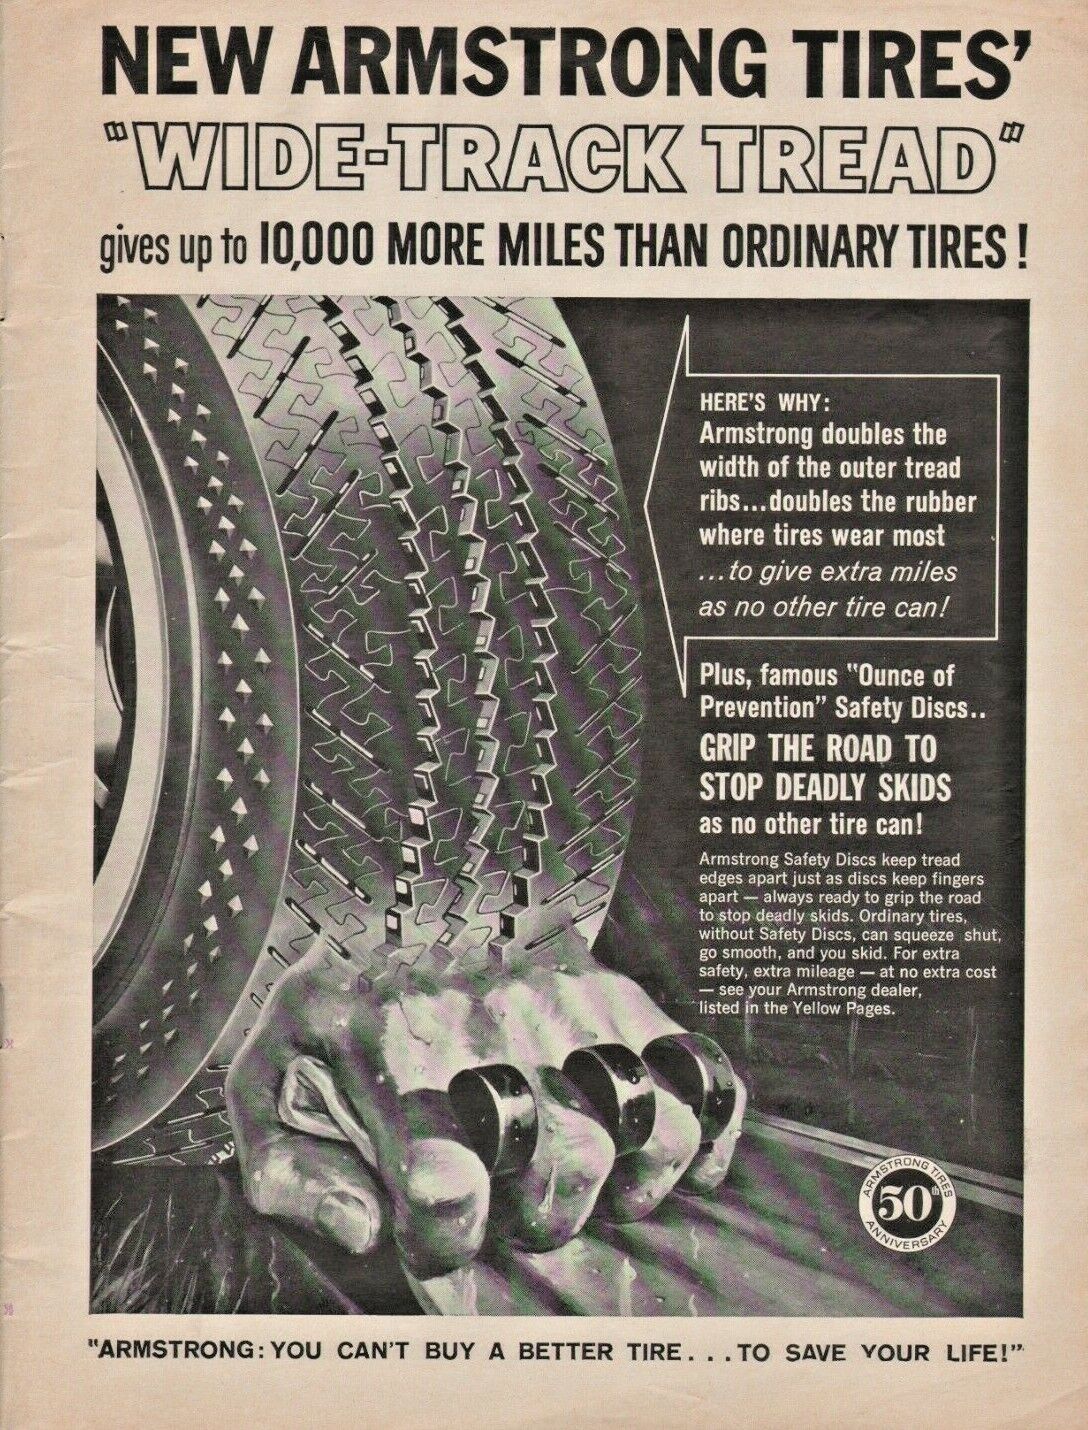 1962 Armstrong Wide-Track Tread Tires with Safety Discs for Grip - Vintage Ad